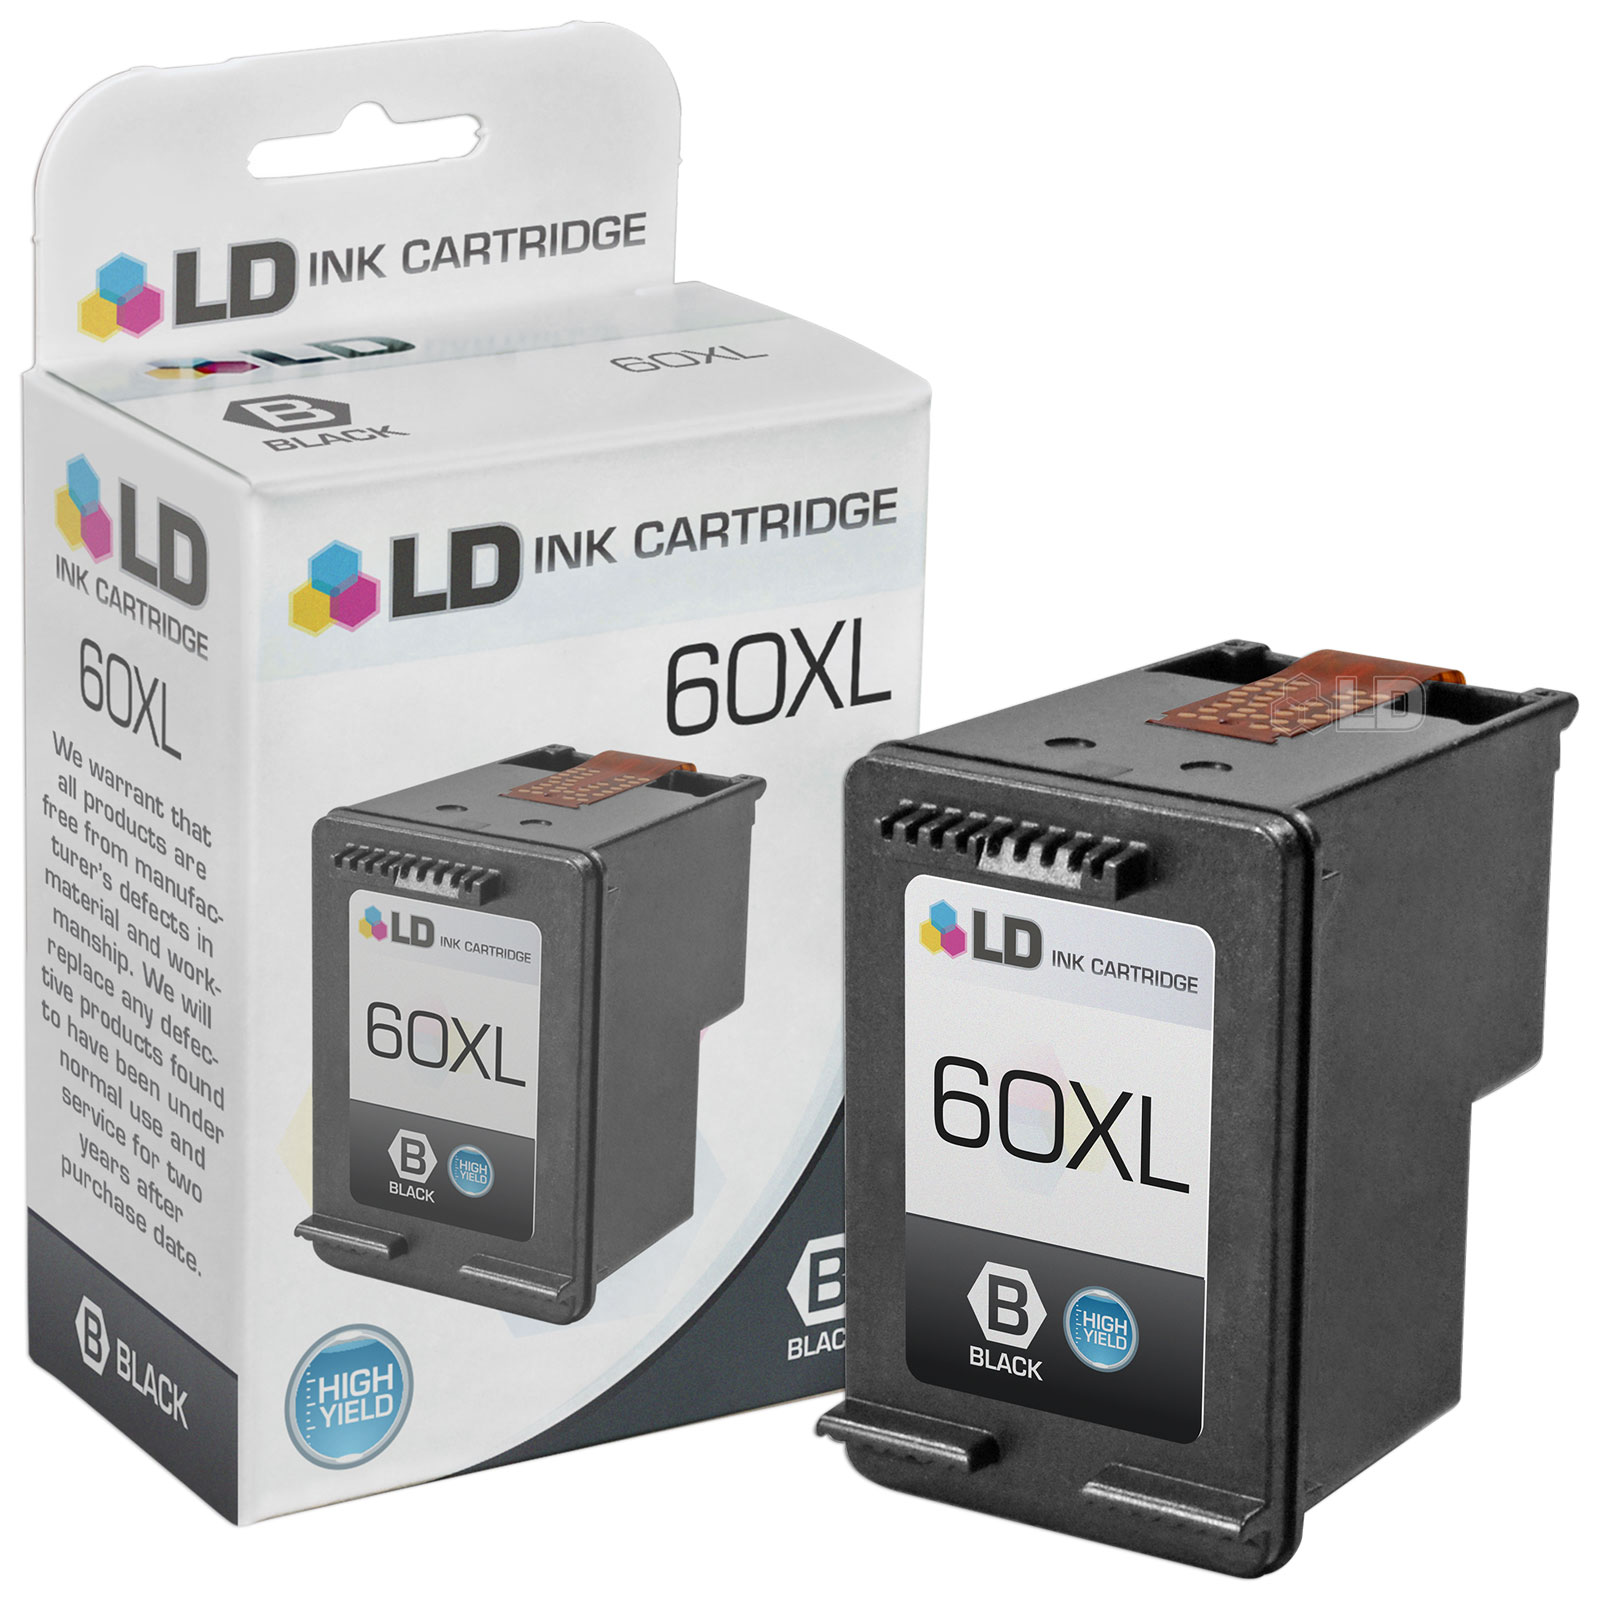 LD © Remanufactured Replacement Ink Cartridge for Hewlett Packard CC641WN 60XL / 60 High-Yield Black - image 1 of 1